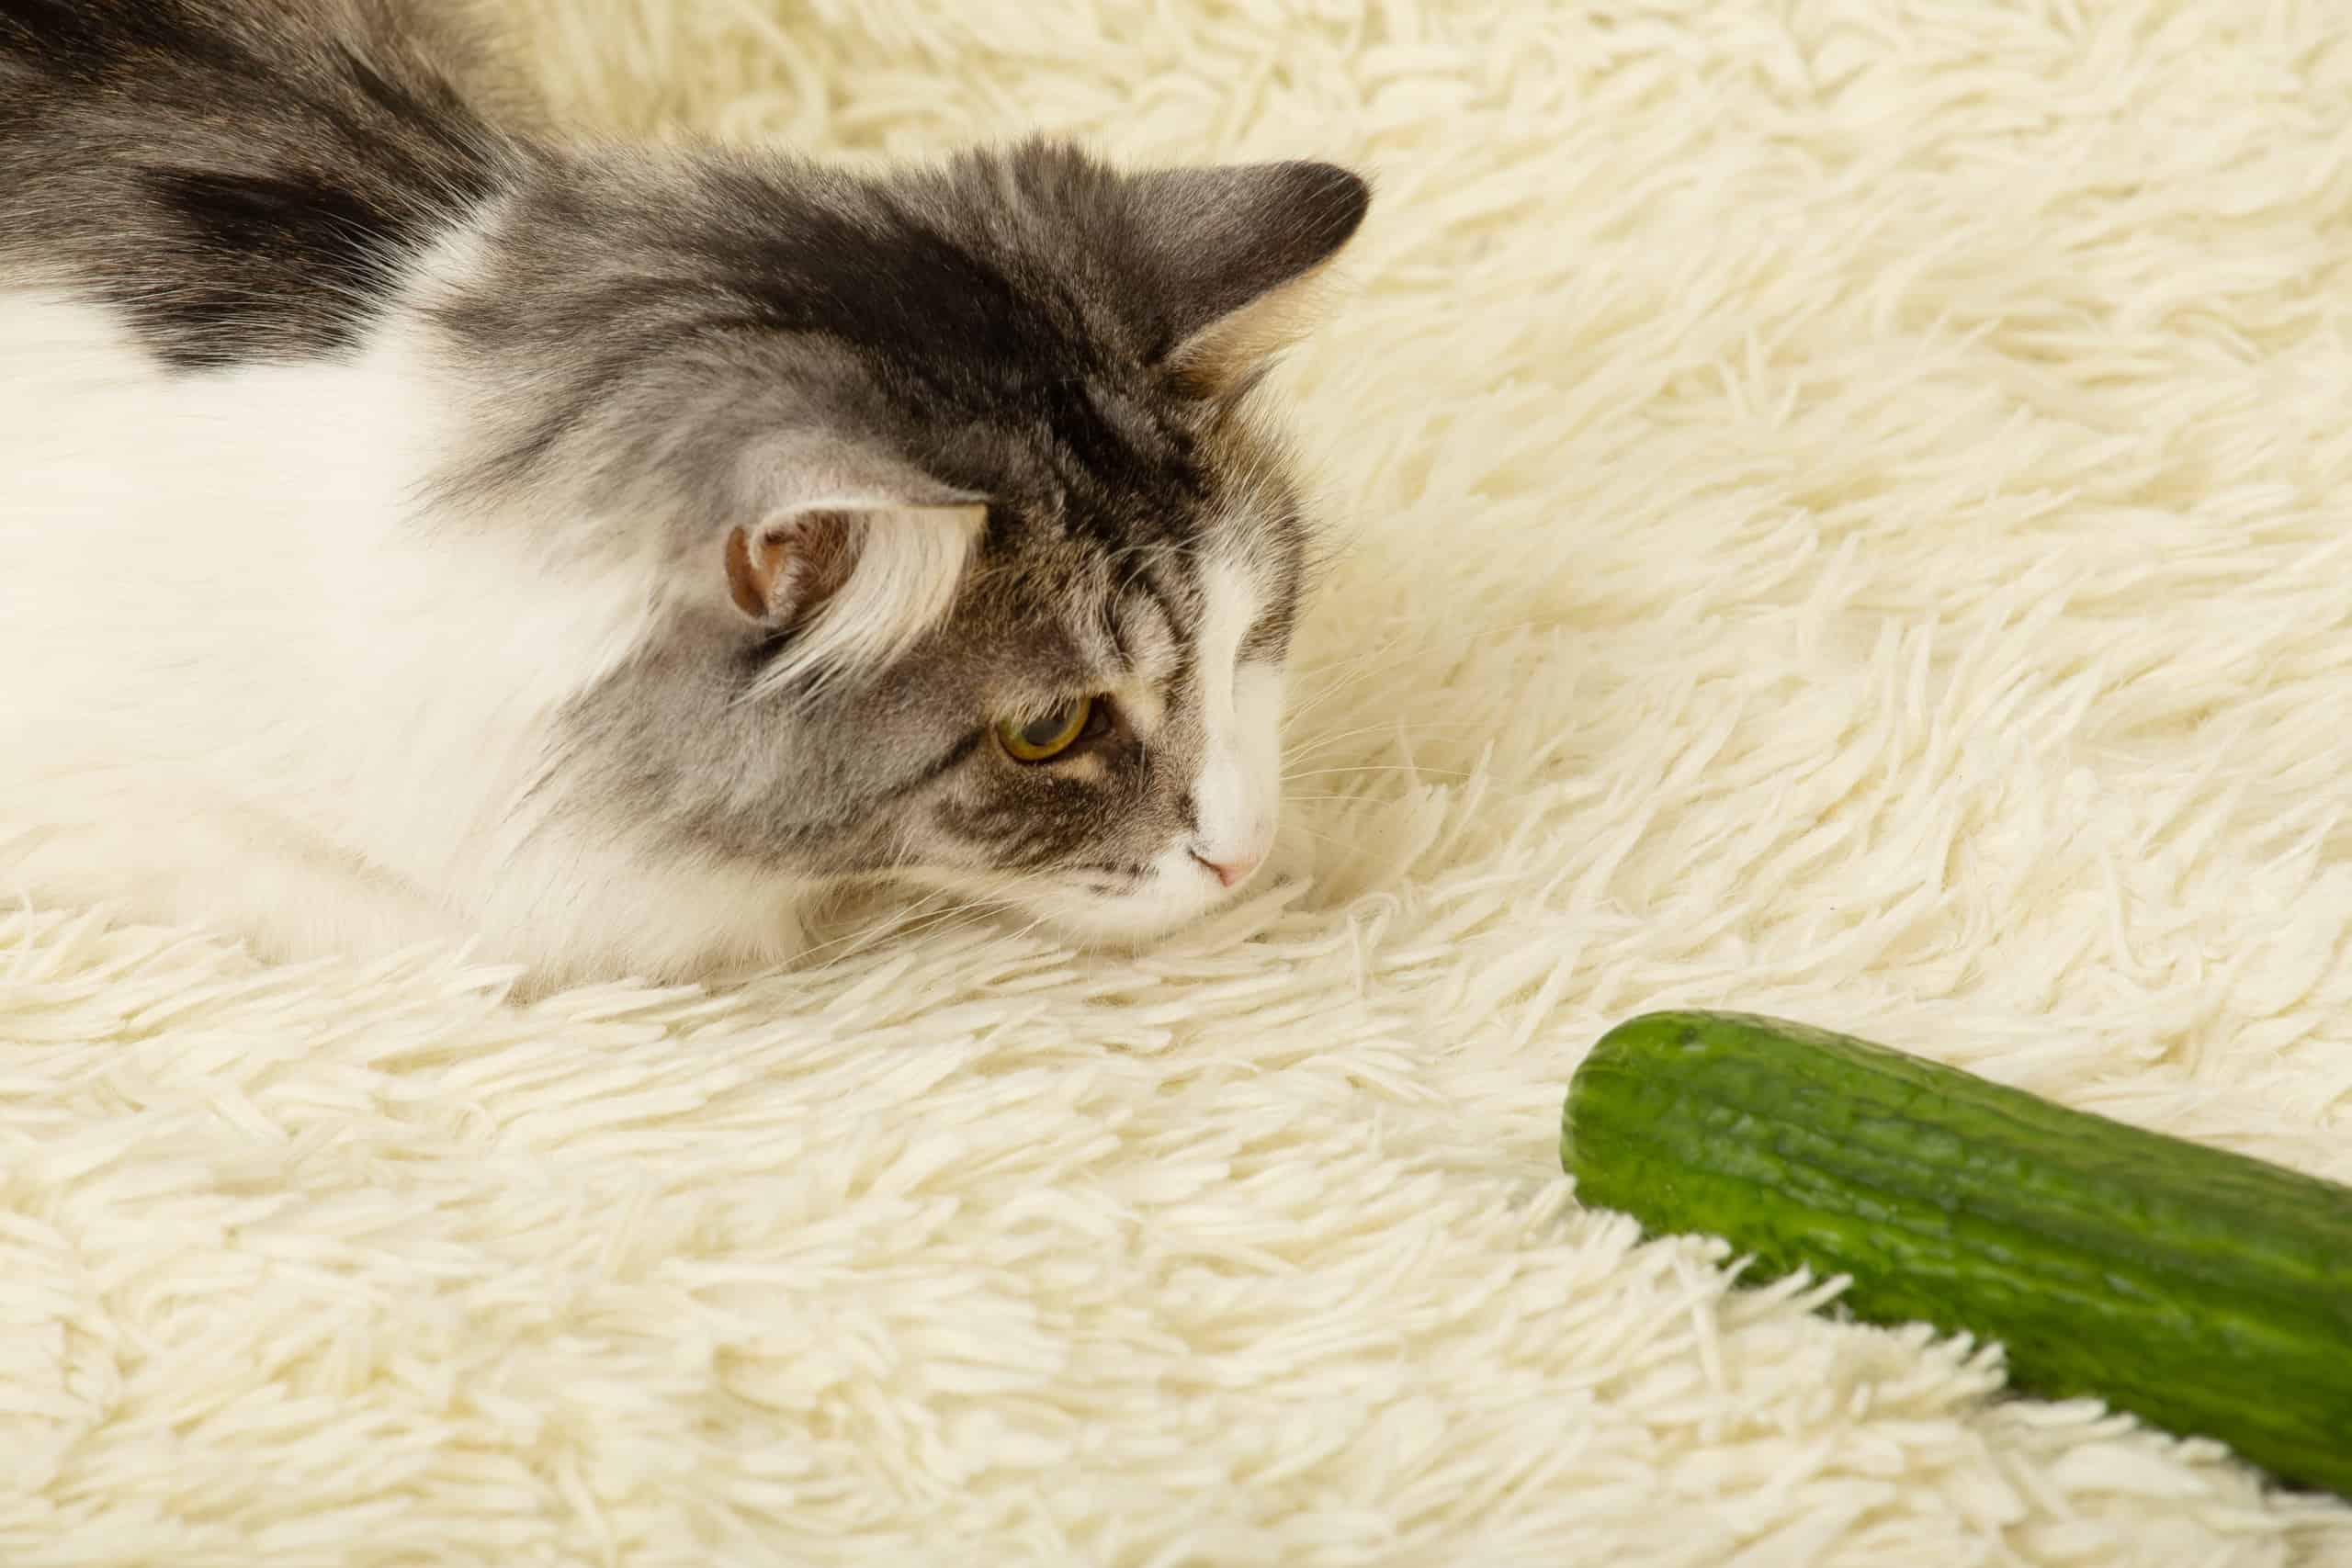 Why Are Cats Scared of Cucumbers? - AZ Animals